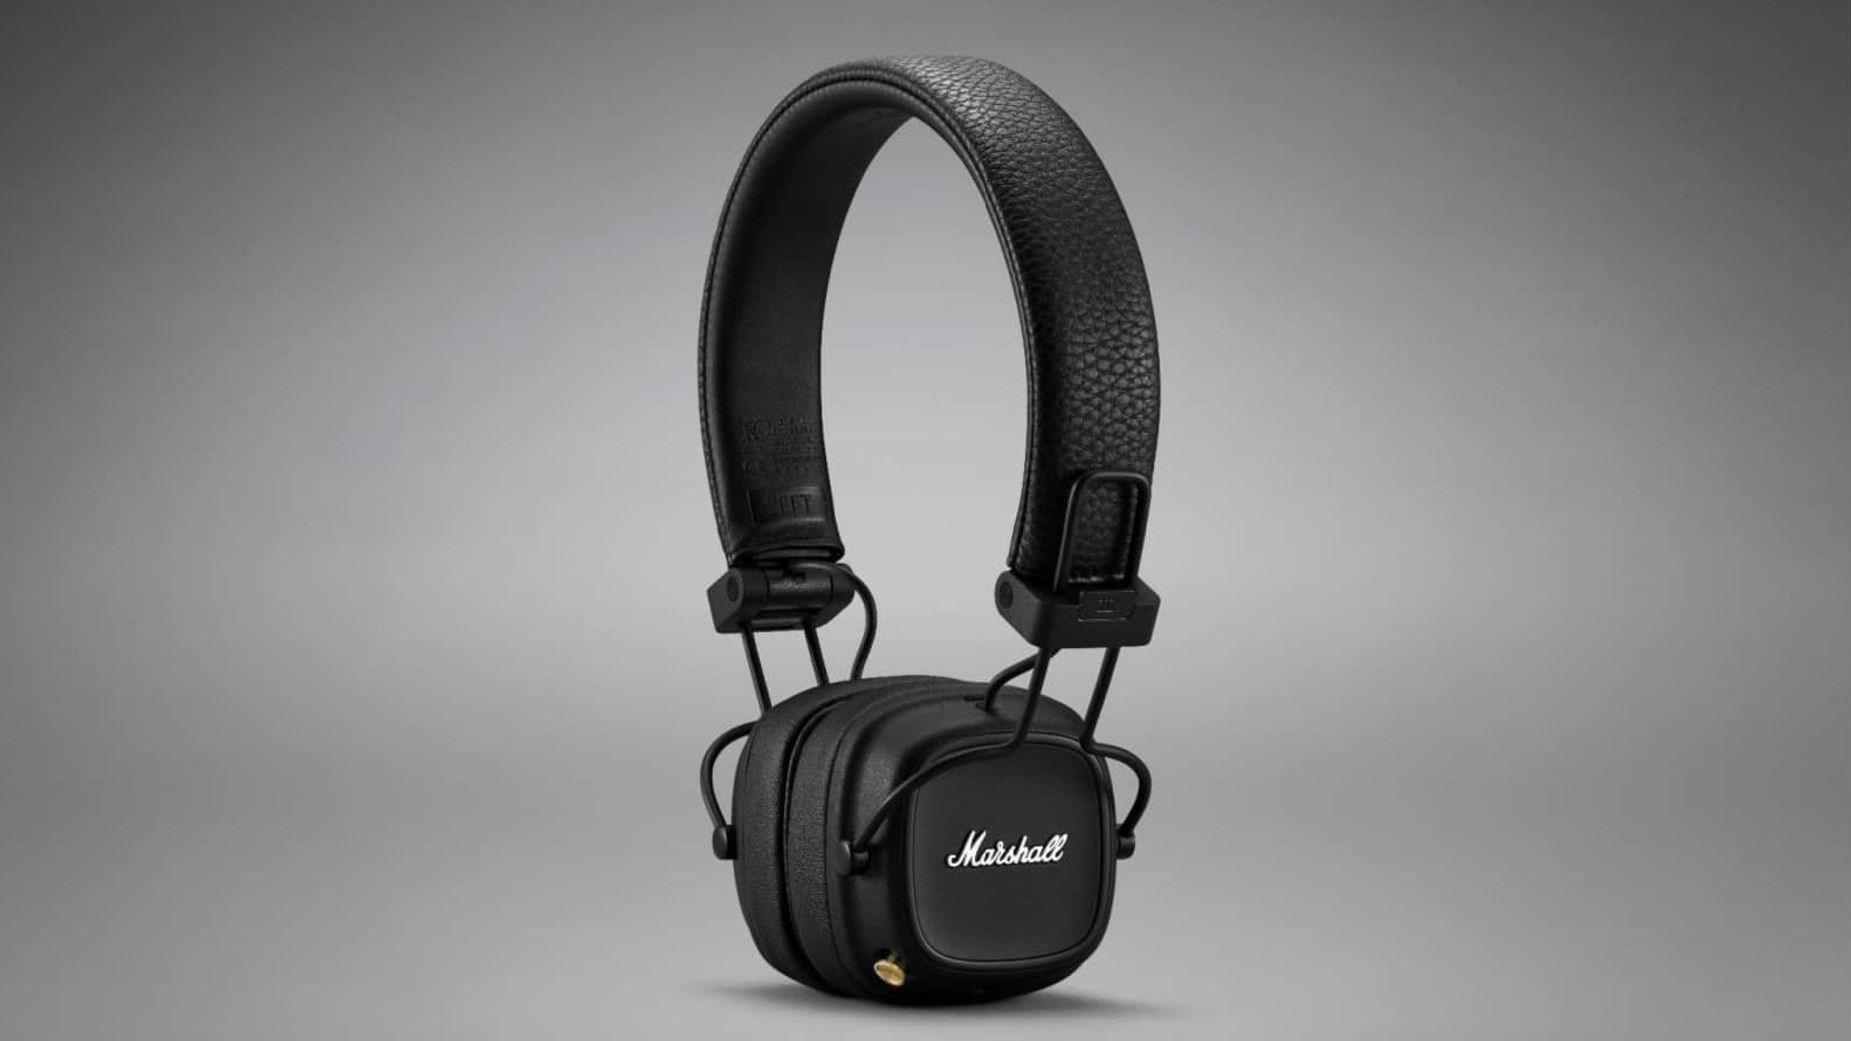 Marshall Release New Headphone, Marshall Major 4 and introduces wireless charging